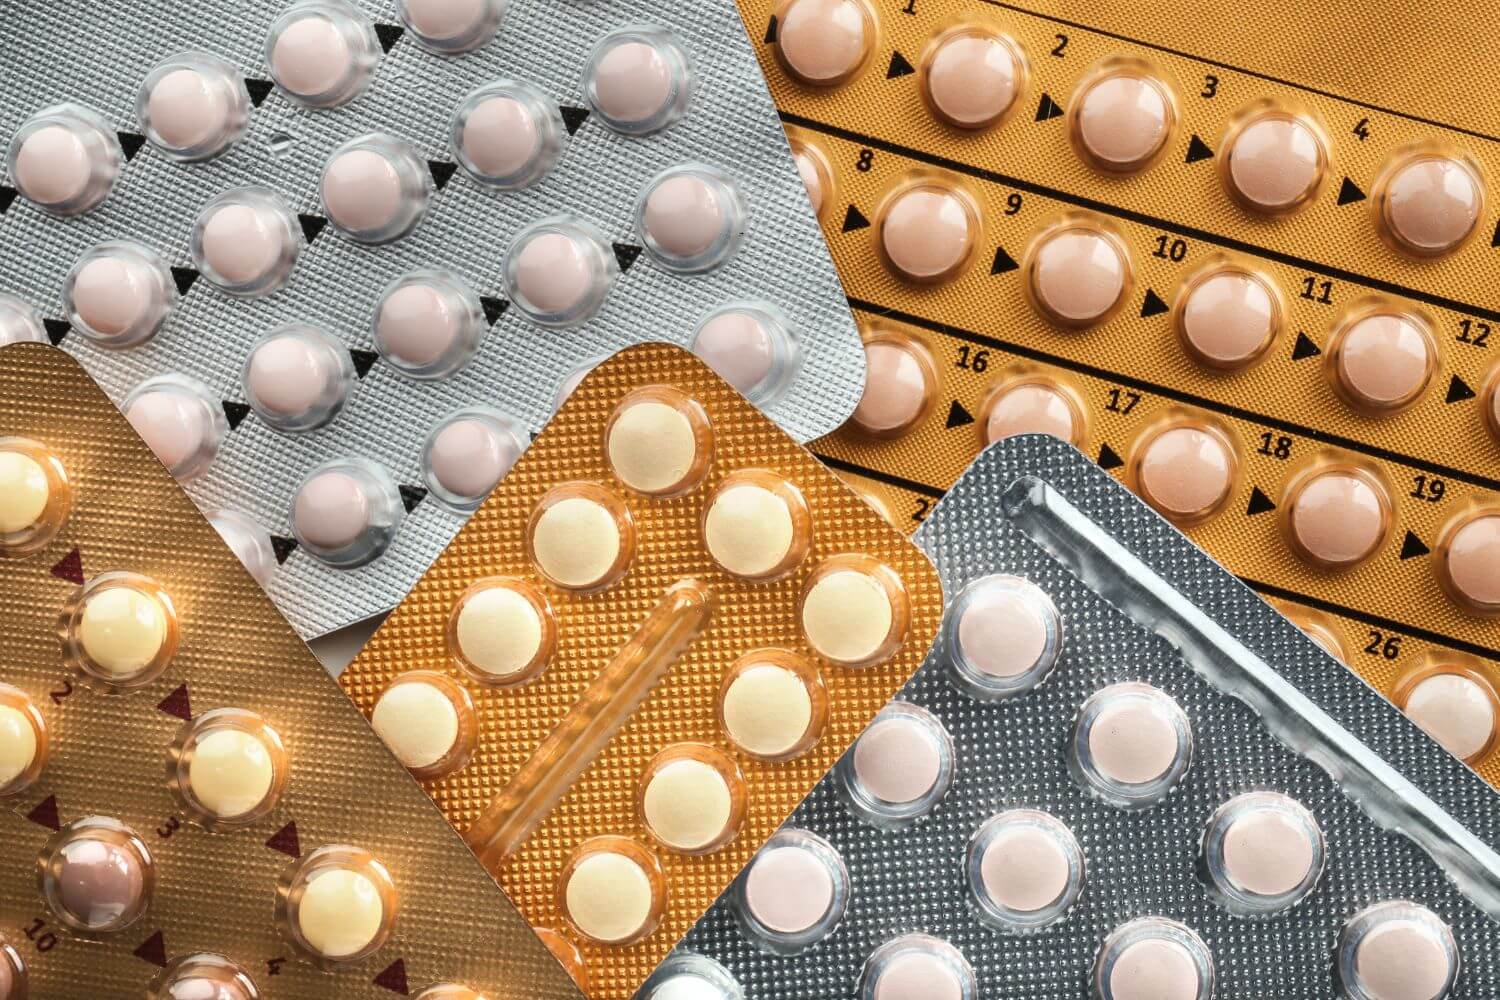 Various types of birth control pills stacked on top of each other